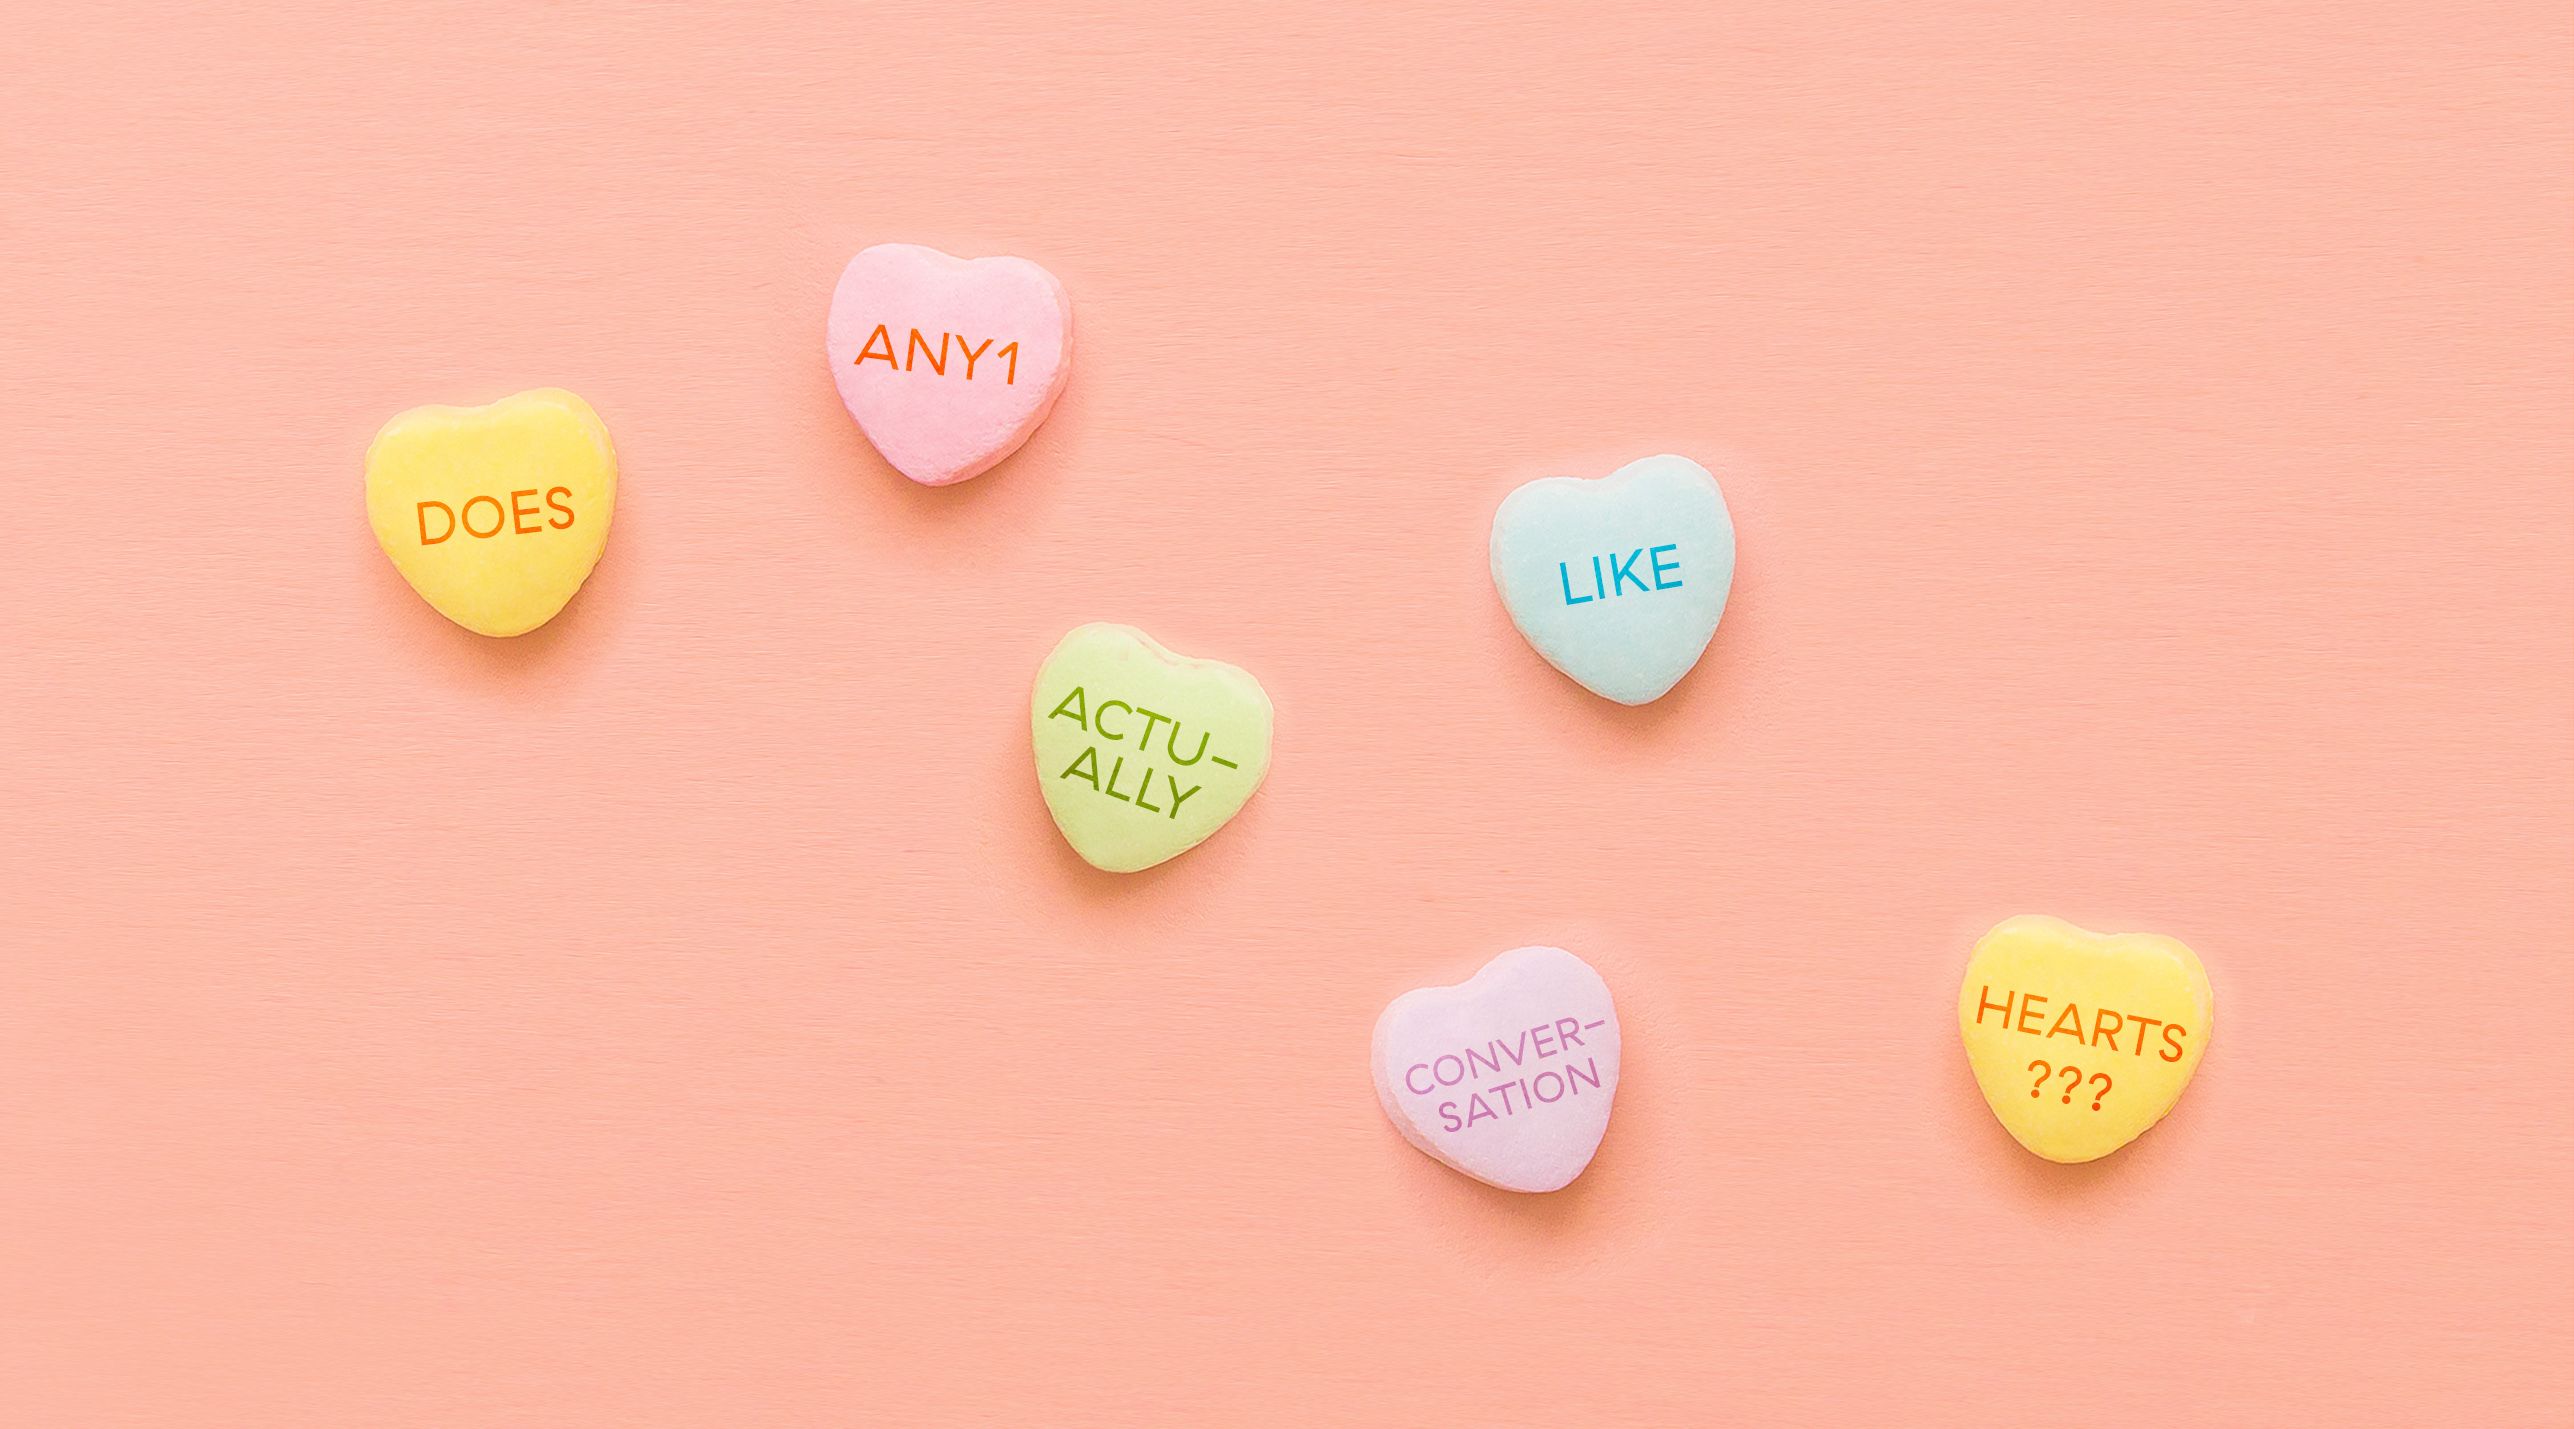 Small Conversation Hearts - Candy Store